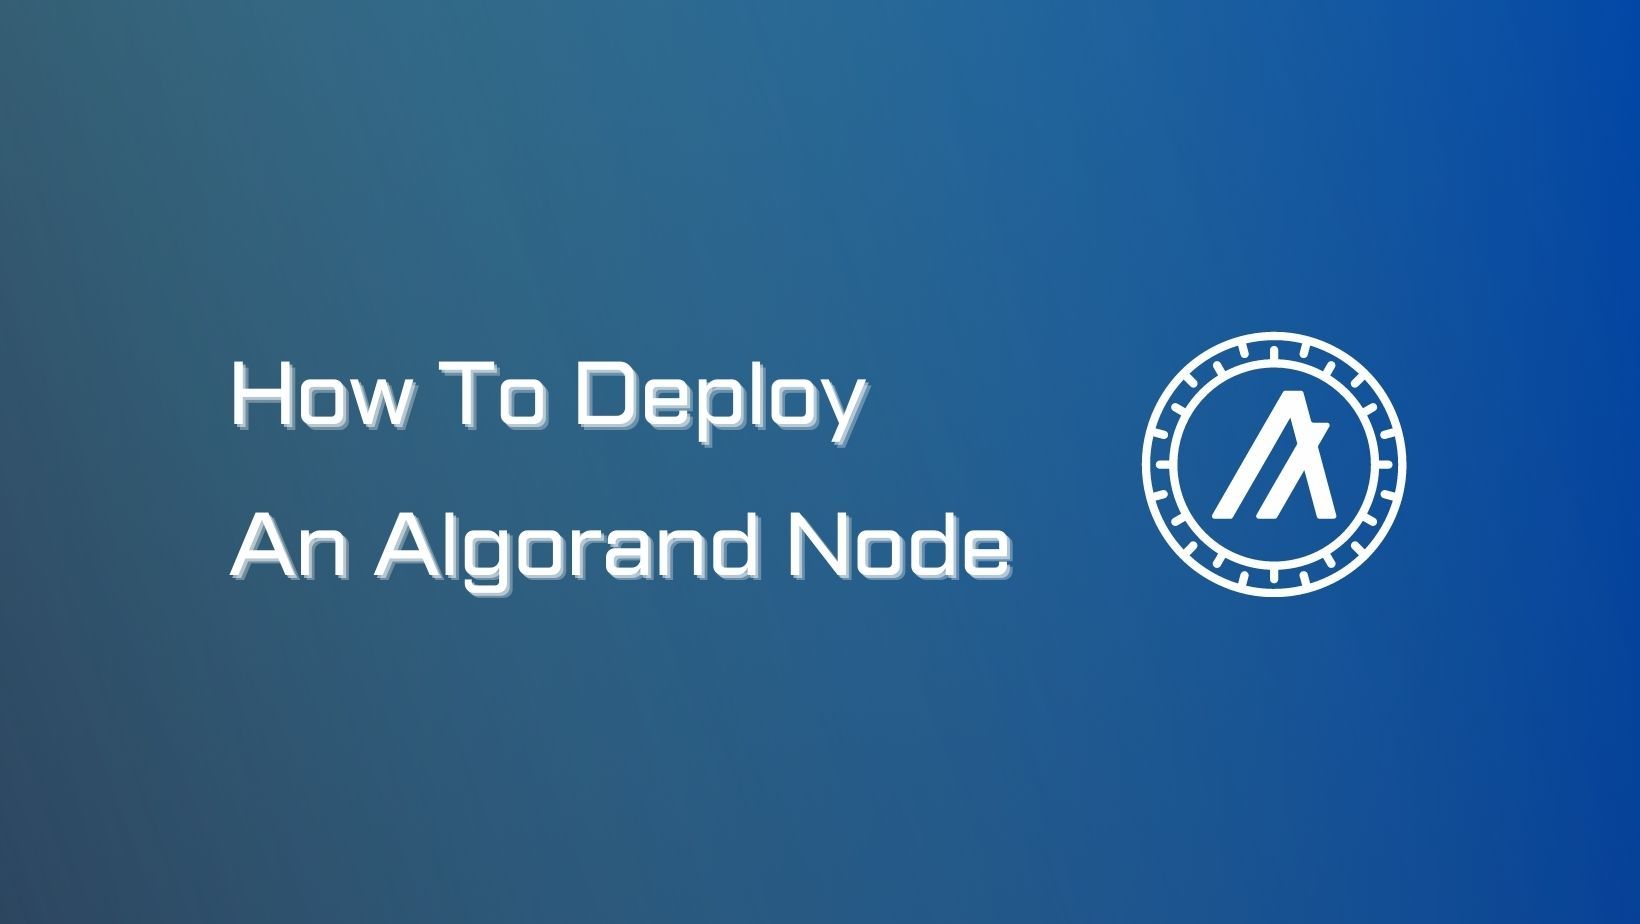 How To Deploy An Algorand Node on Linux